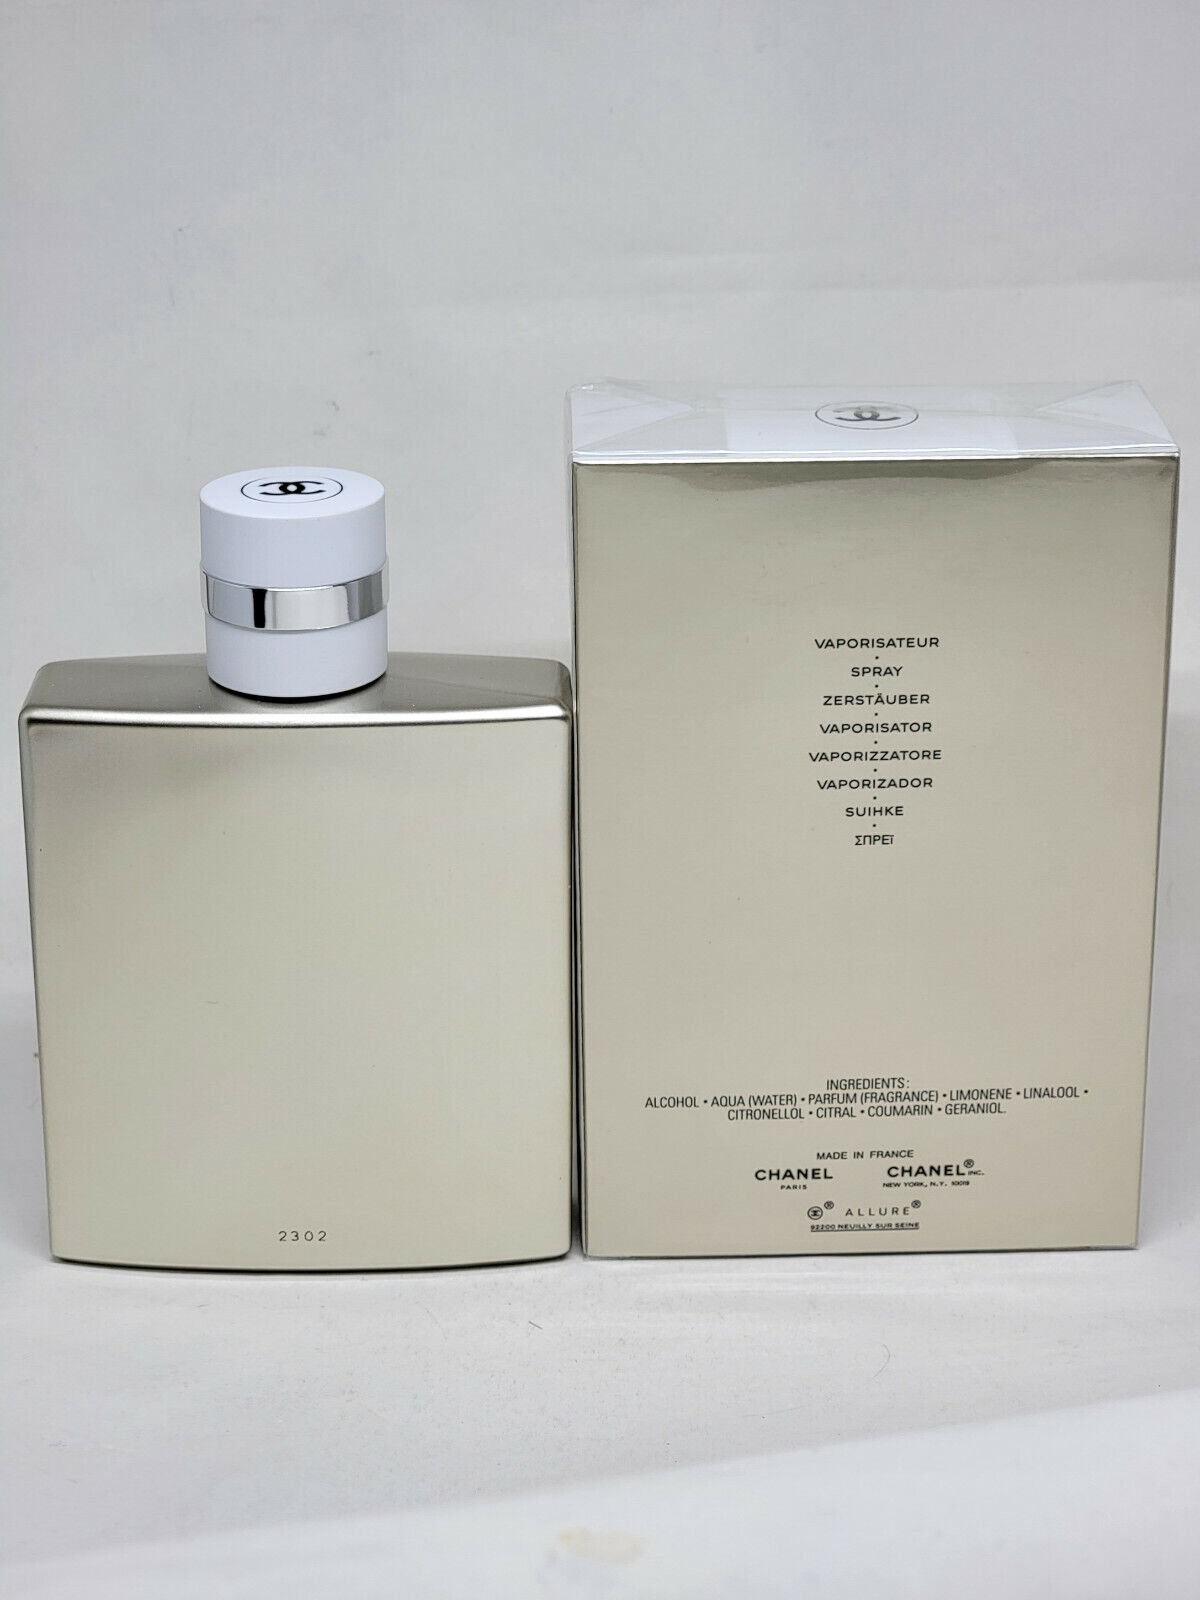 Allure Homme Edition Blanche FOR MEN by Chanel - 1.7 oz EDT Spray  Concentrate Size